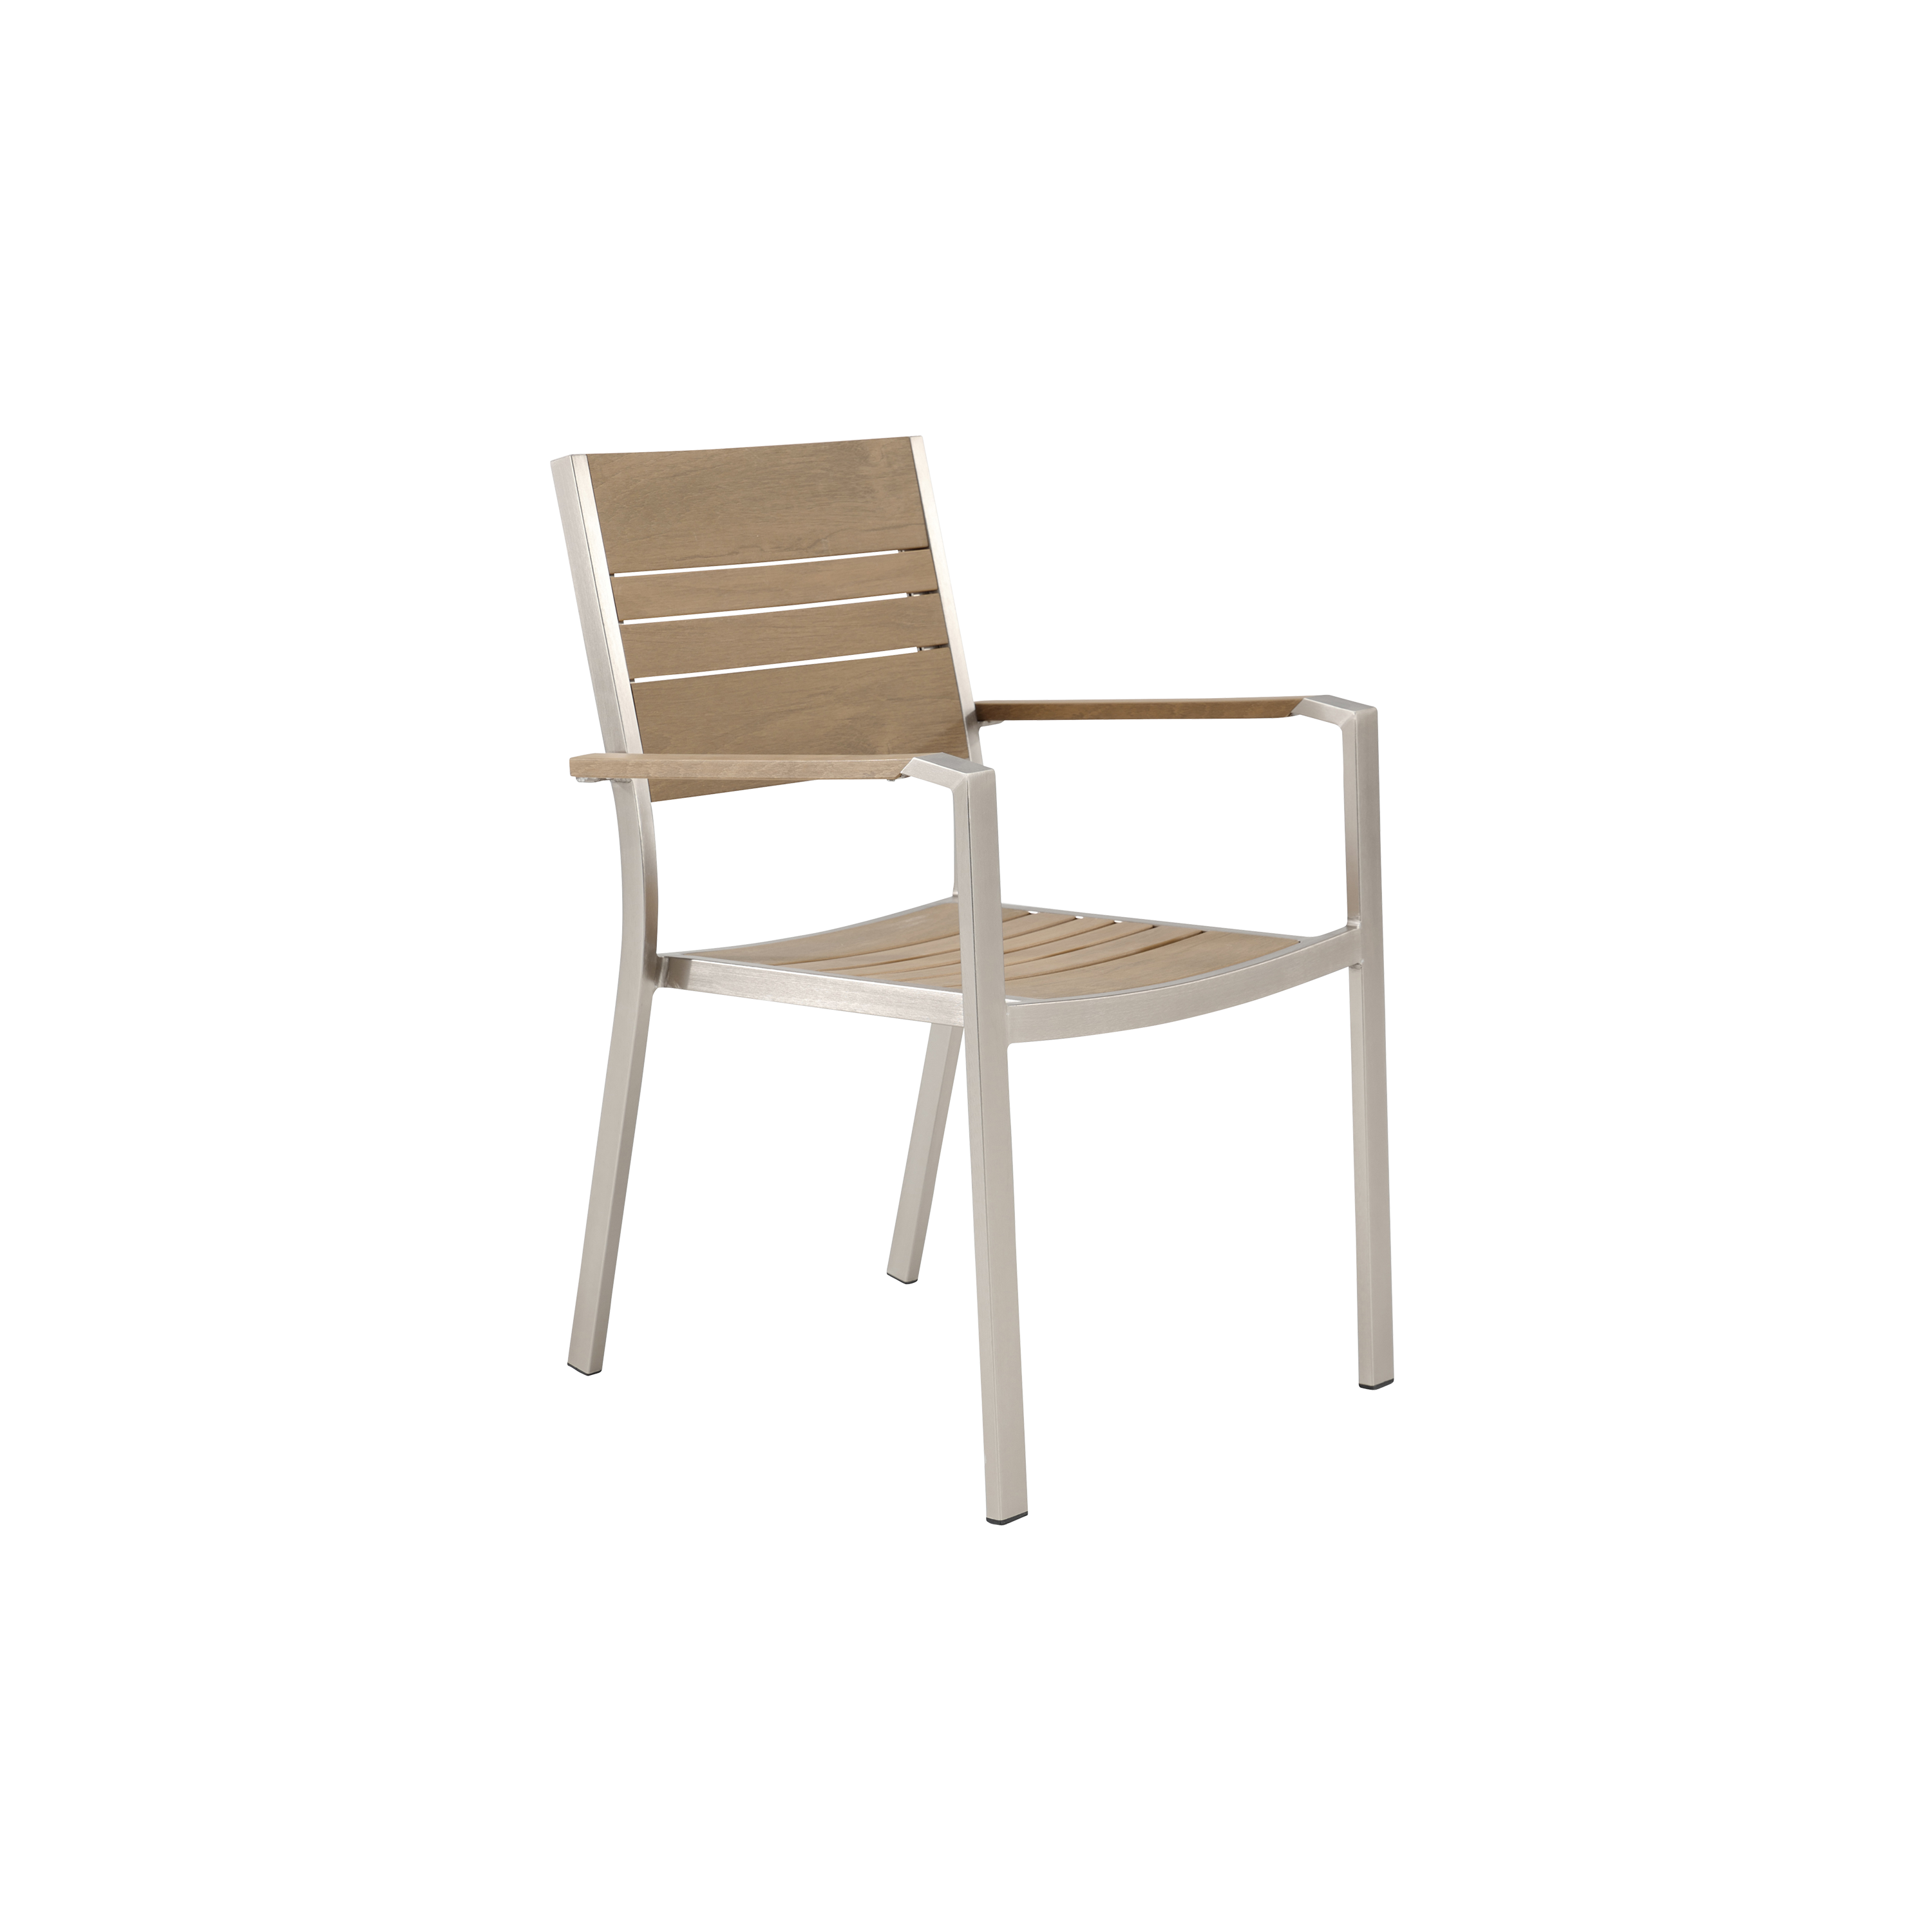 CHAIR WITH ARMRESTS MENORCA NATERIAL 57X55 ALUMINUM POLIWOOD